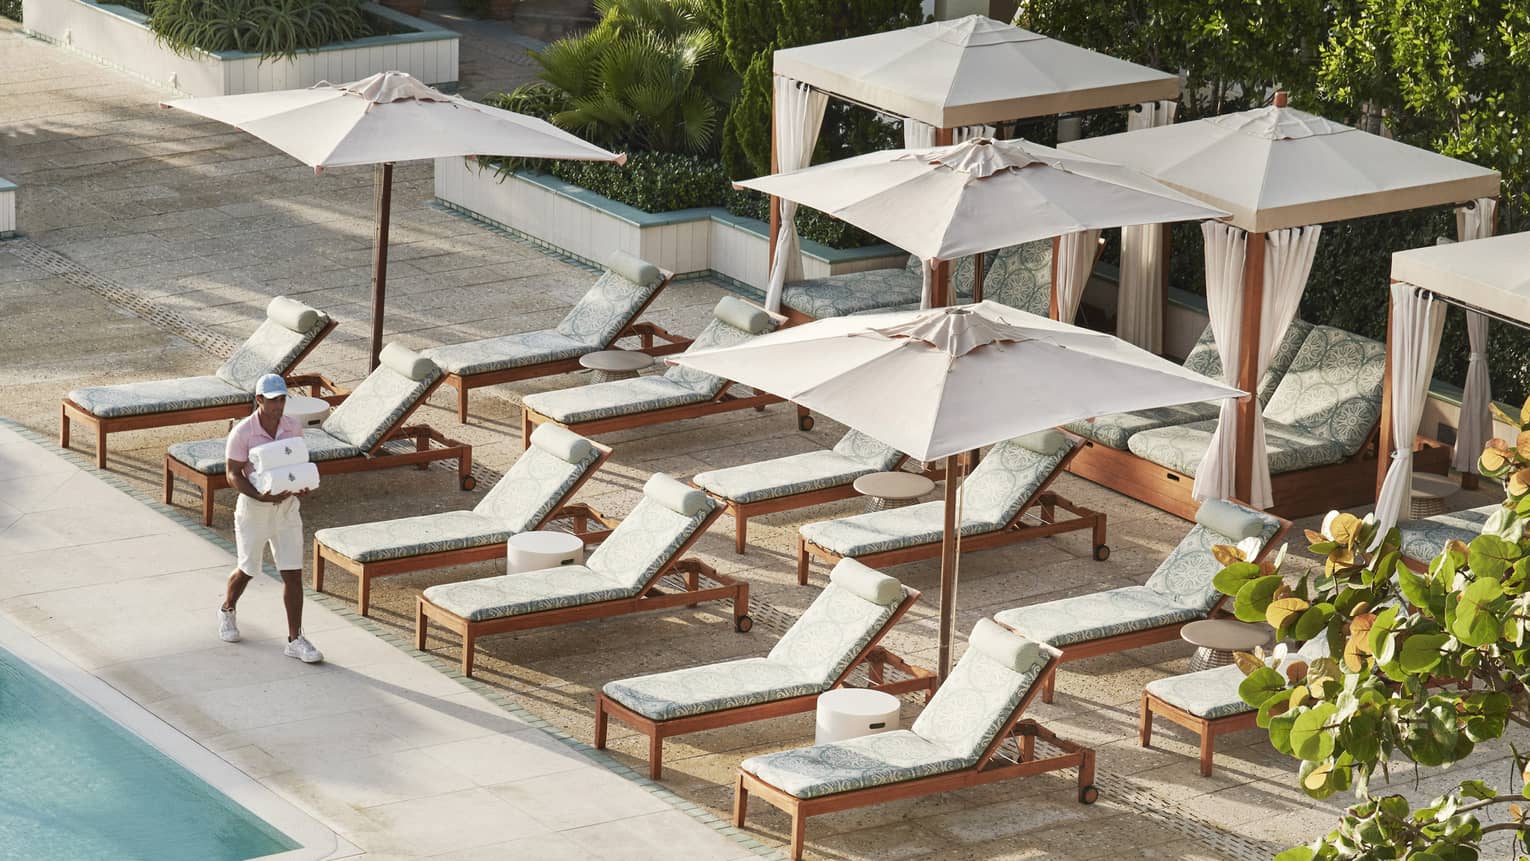 Poolside lounge chairs and umbrellas with a hotel team member carrying towels.